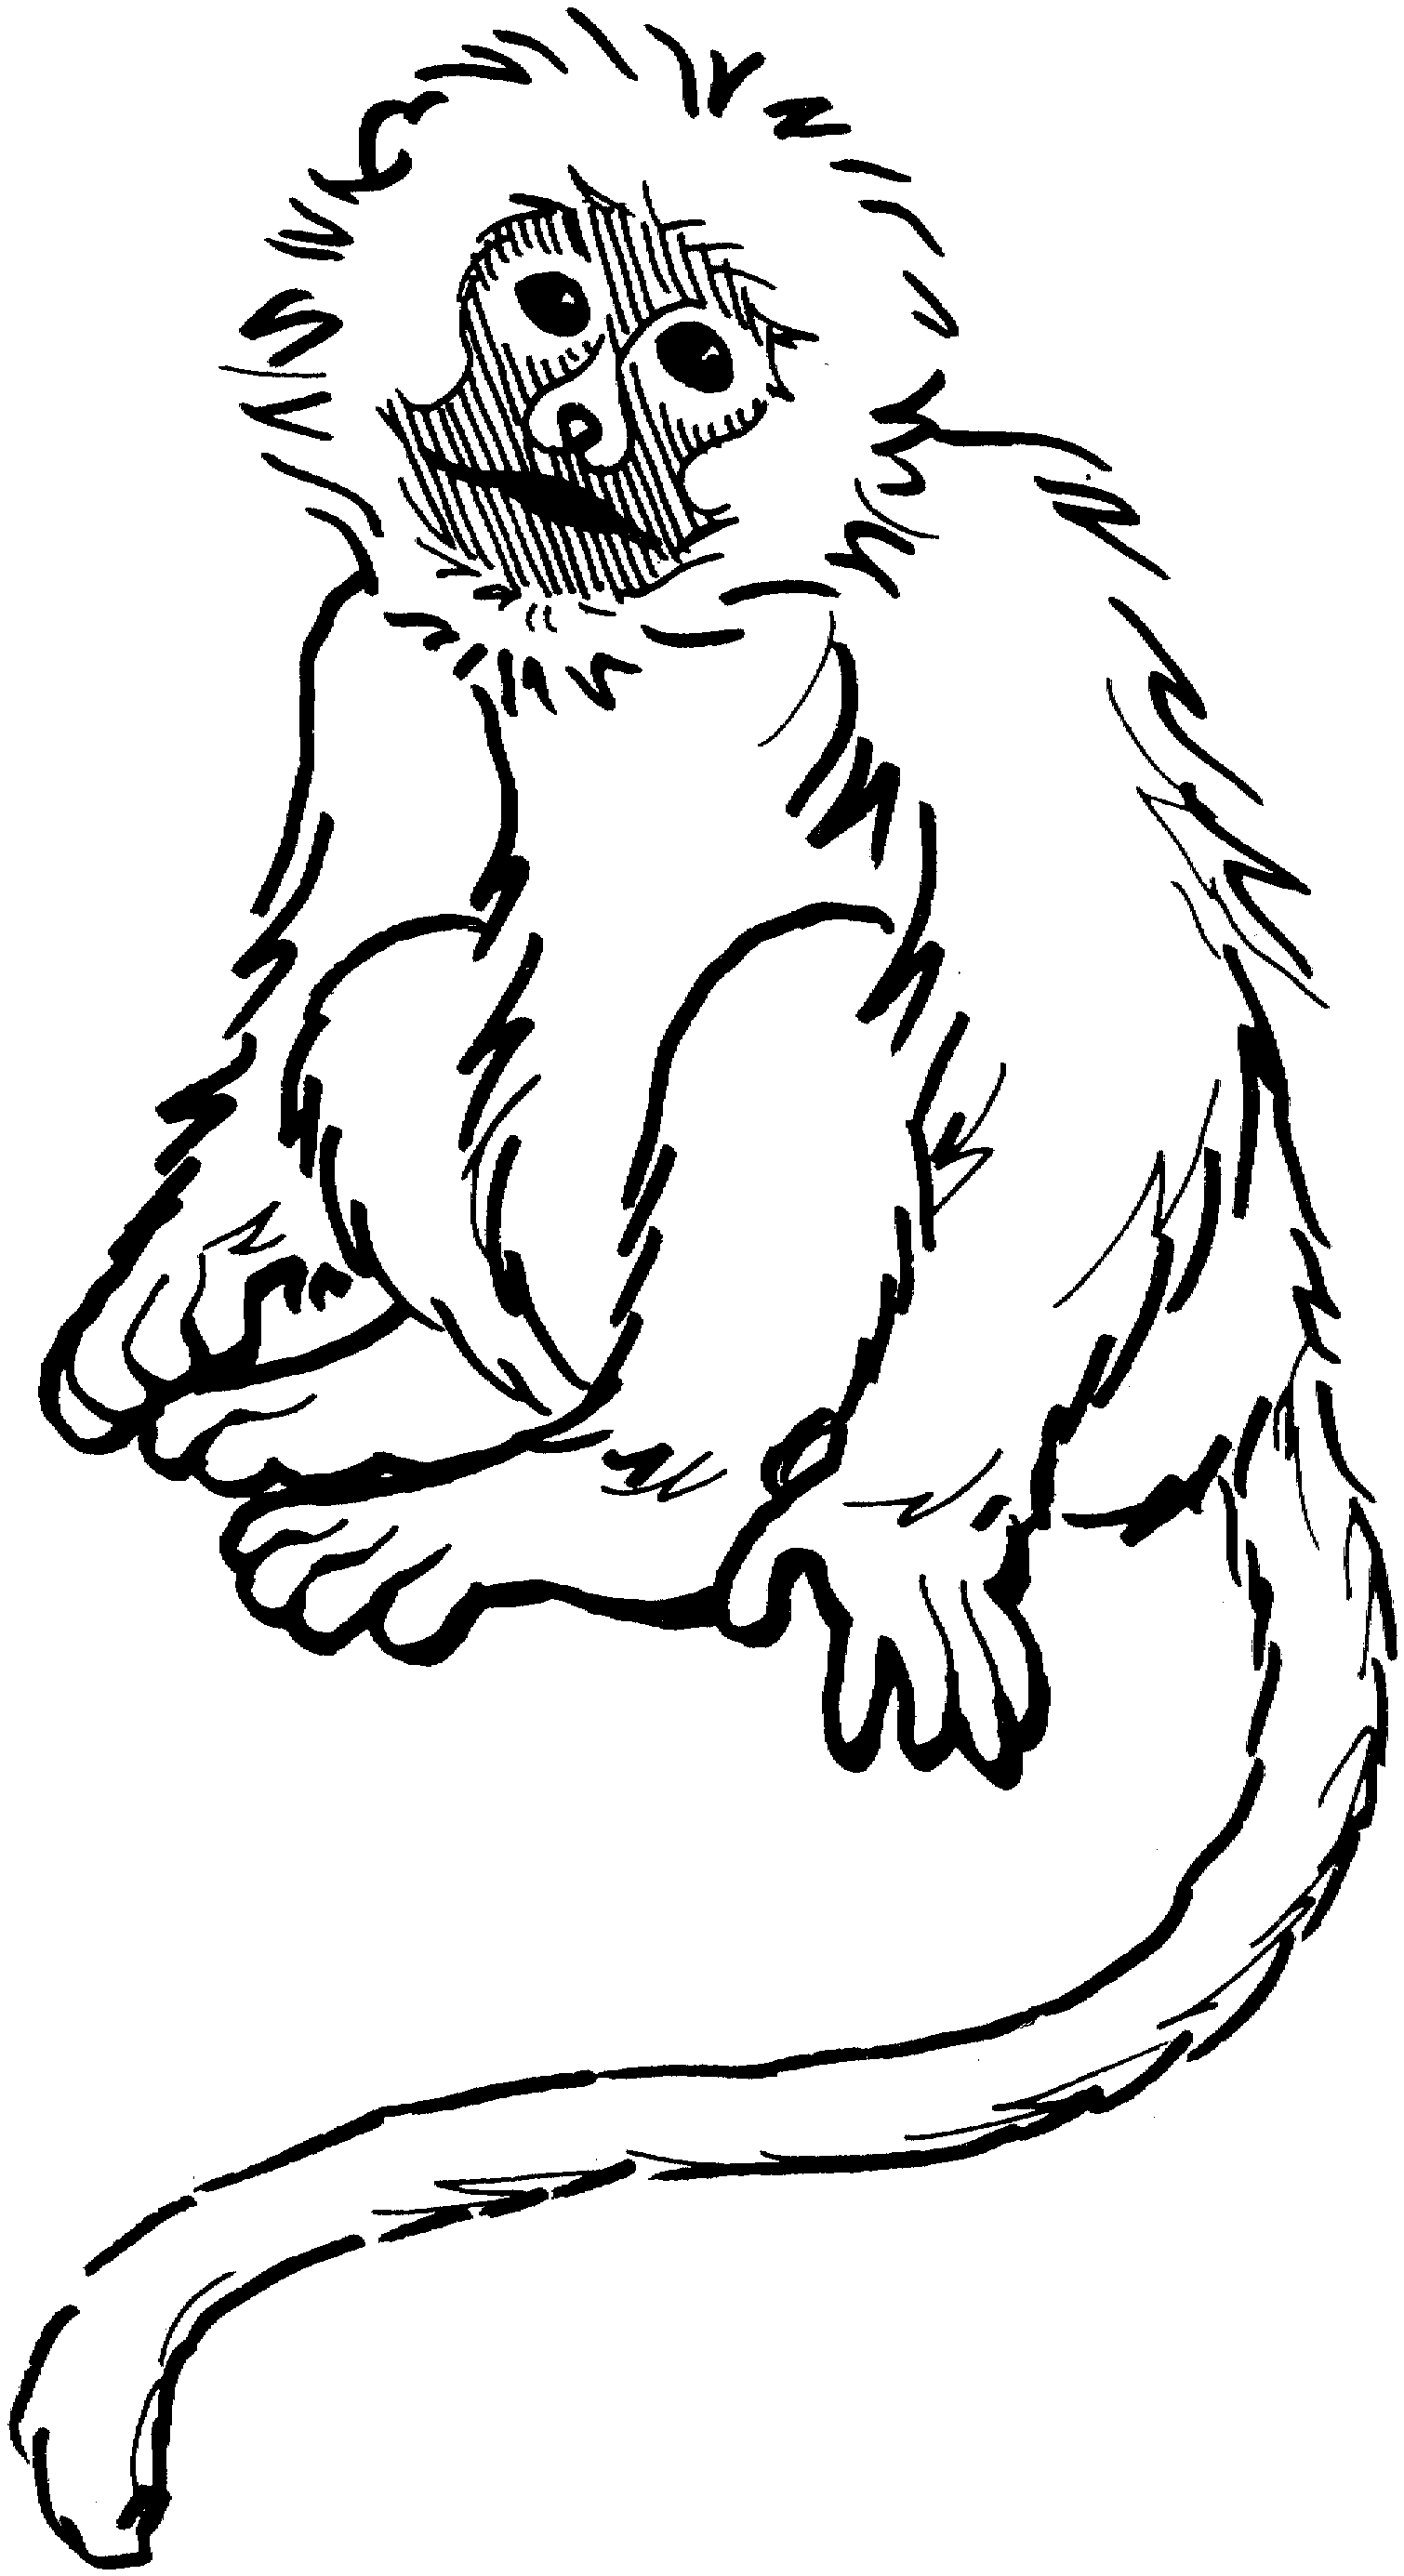 Colobus Monkey  clipart #3, Download drawings